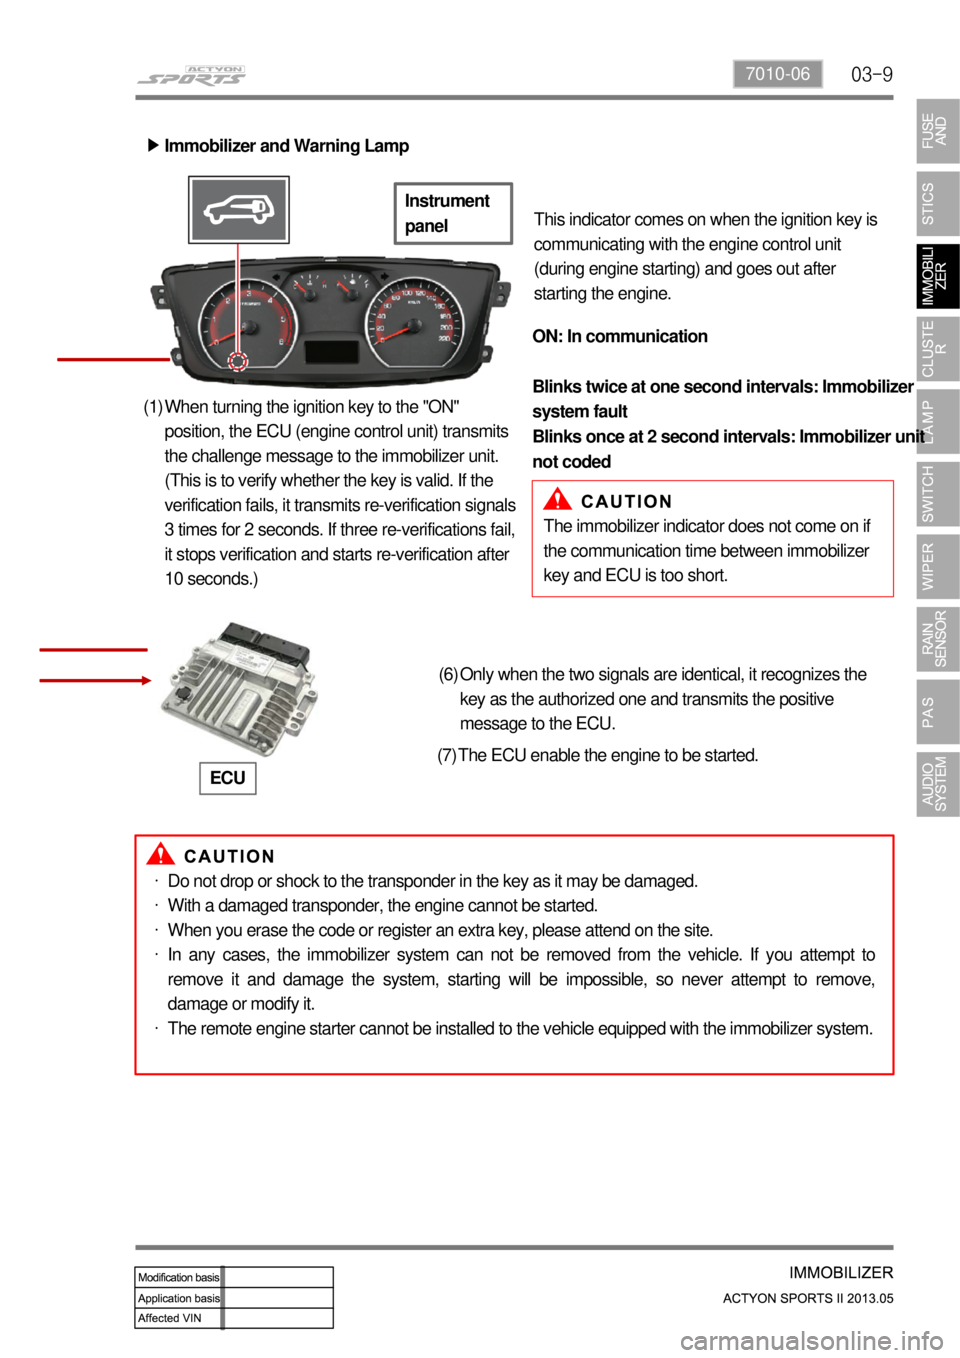 SSANGYONG NEW ACTYON SPORTS 2013  Service Manual 03-97010-06
Immobilizer and Warning Lamp ▶
This indicator comes on when the ignition key is 
communicating with the engine control unit 
(during engine starting) and goes out after 
starting the eng